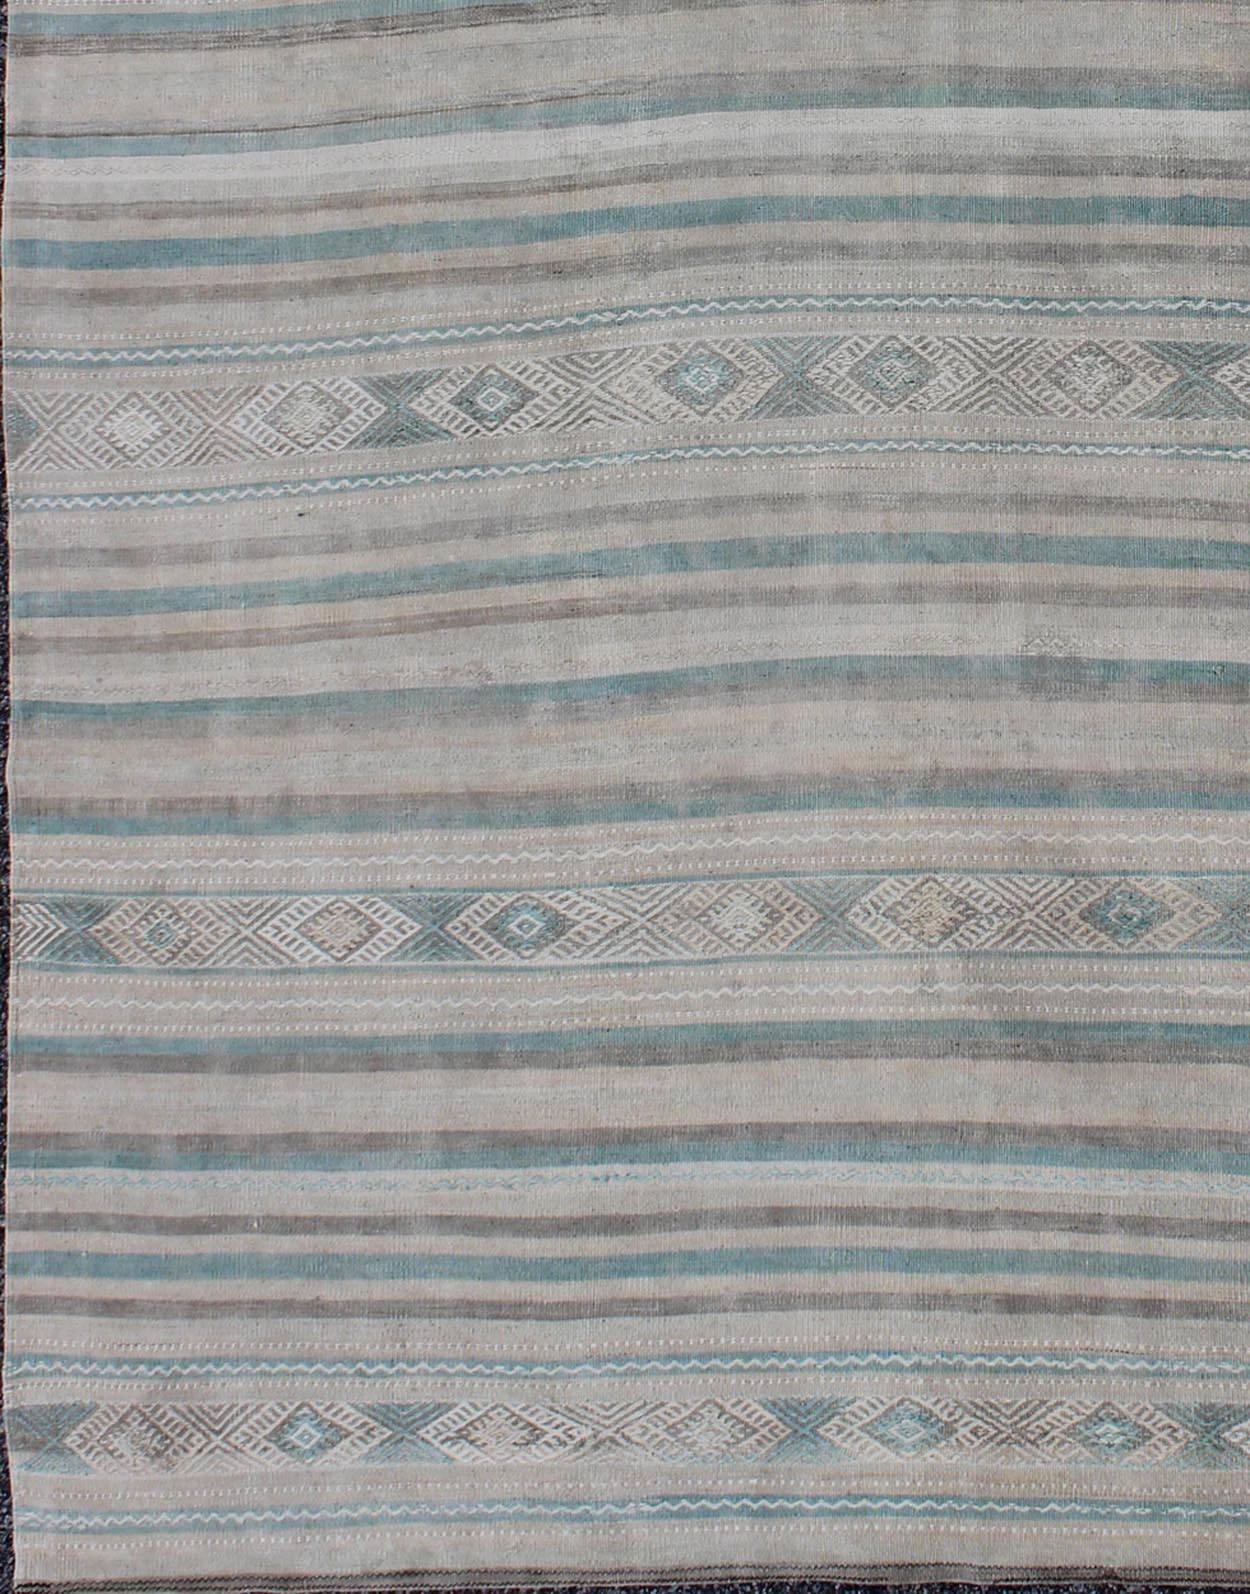 Geometric stripe design vintage Kilim rug from Turkey in gray, blue-green, taupe, camel, rug en-141148, country of origin / type: Turkey / Kilim, circa 1950

Featuring a horizontal stripe design rendered in geometric shapes, this unique midcentury